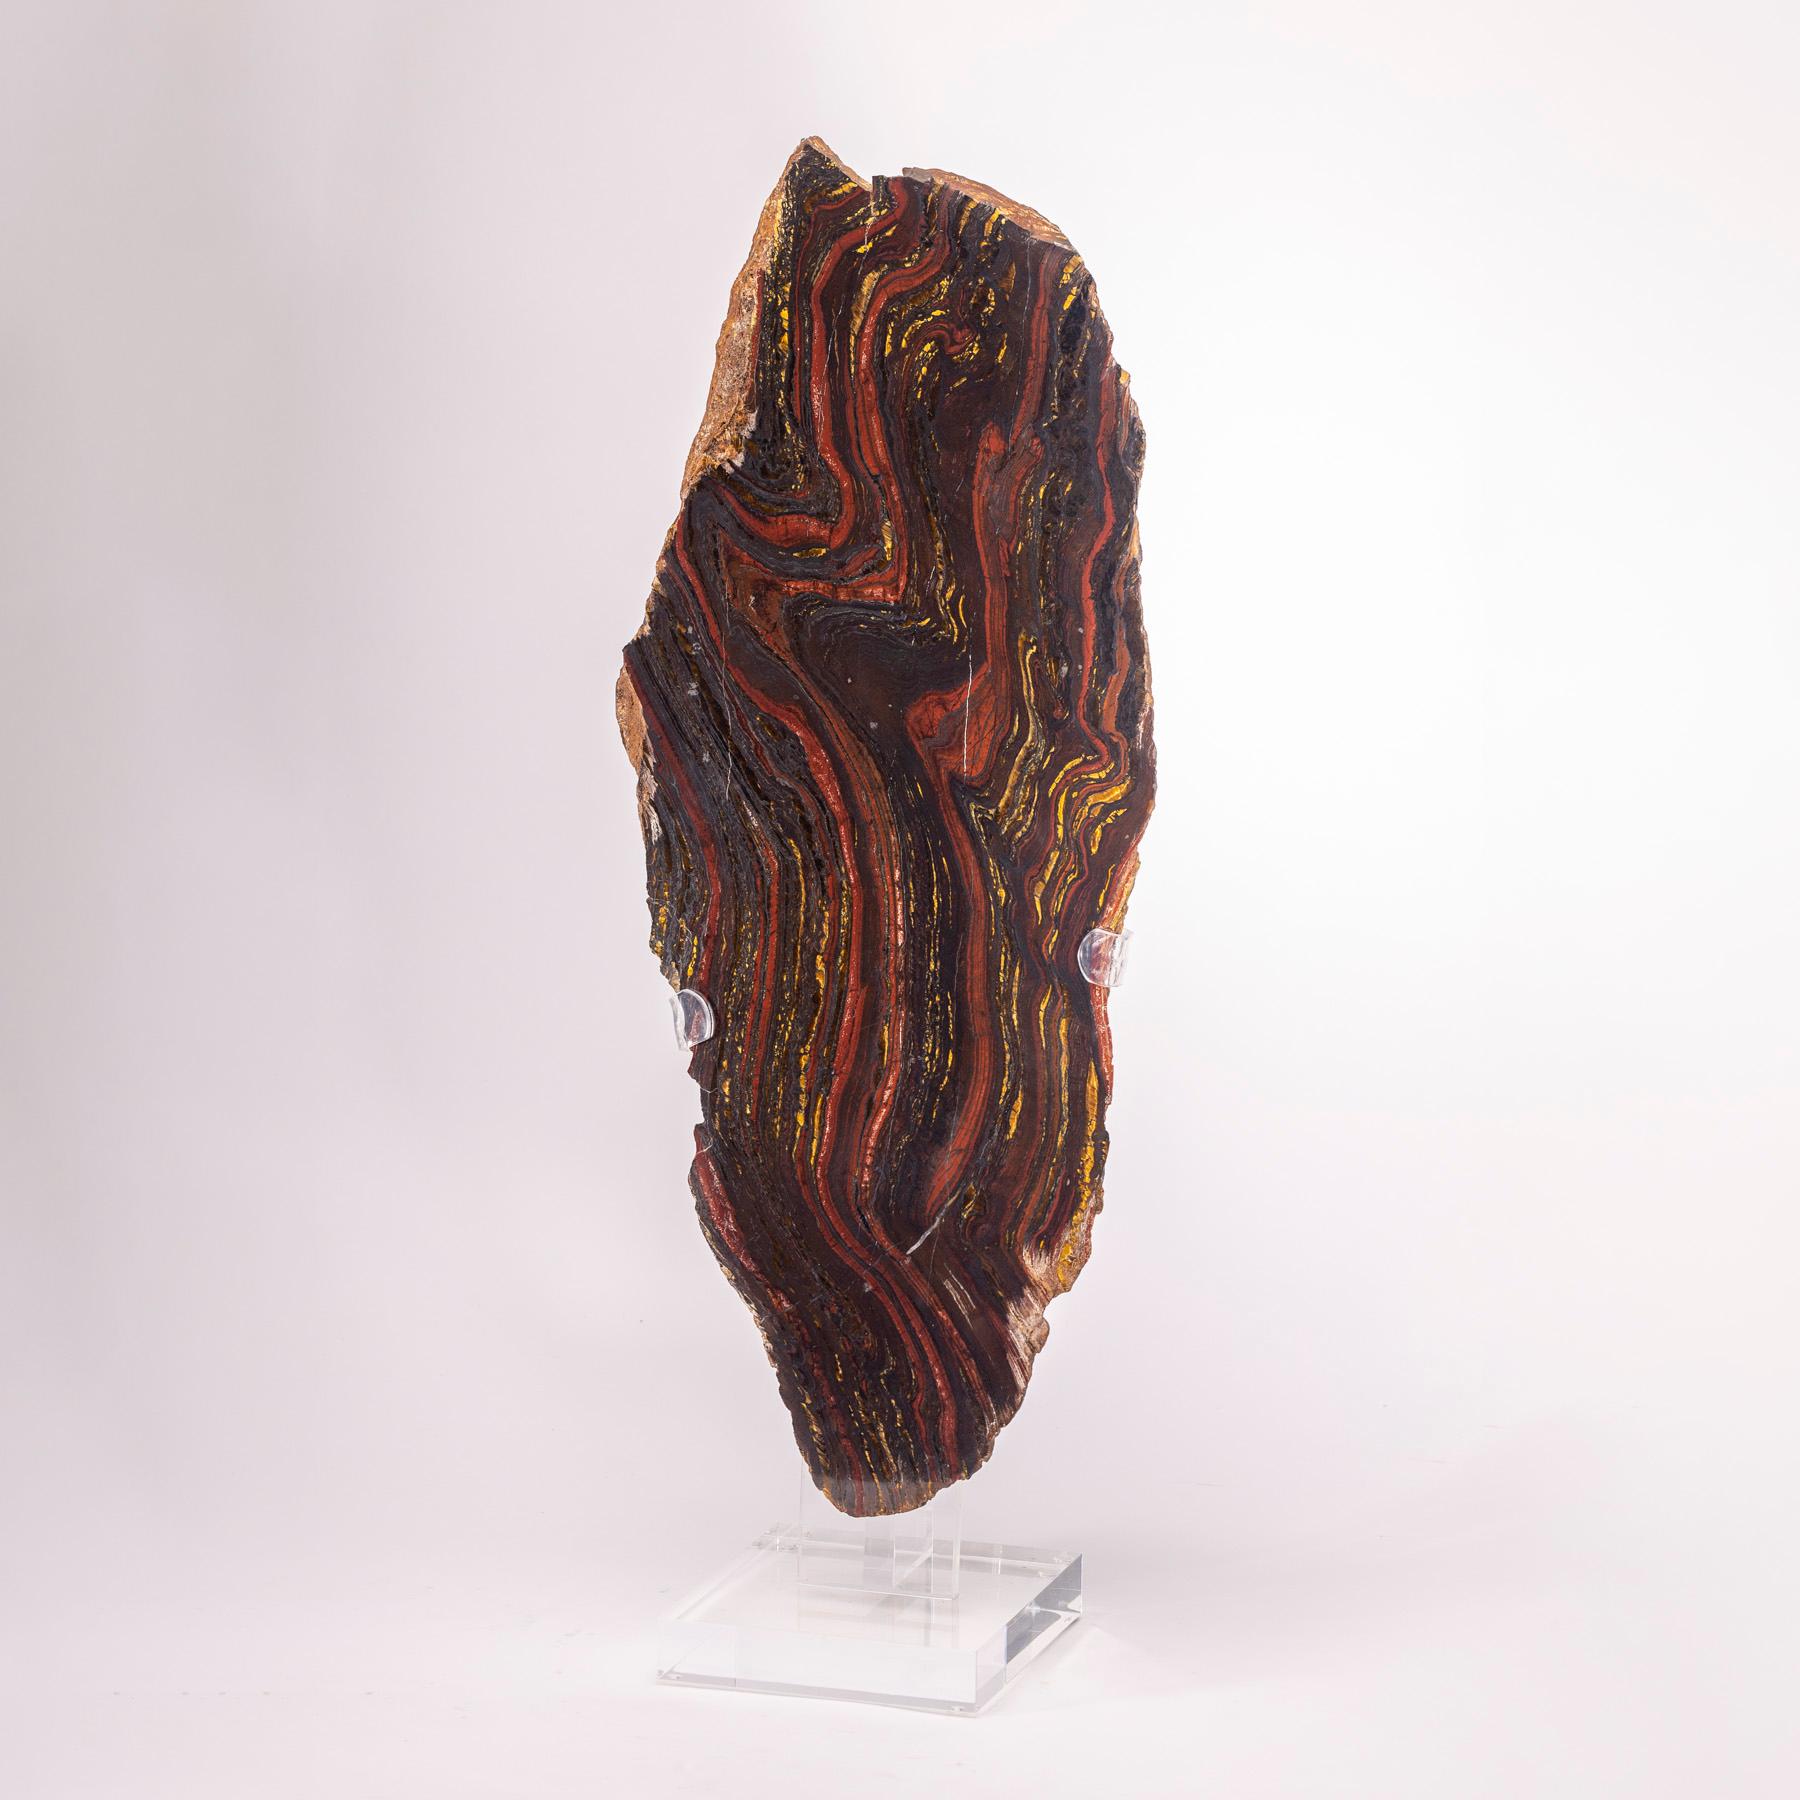 Beautiful banded tiger- iron slab from South Africa

It´s a combination of Gold Tiger Eye, Hematite and Red Jasper. Its name refers to the composition of the stone, Tiger Eye and Hematite which is a stone rich in iron.
 